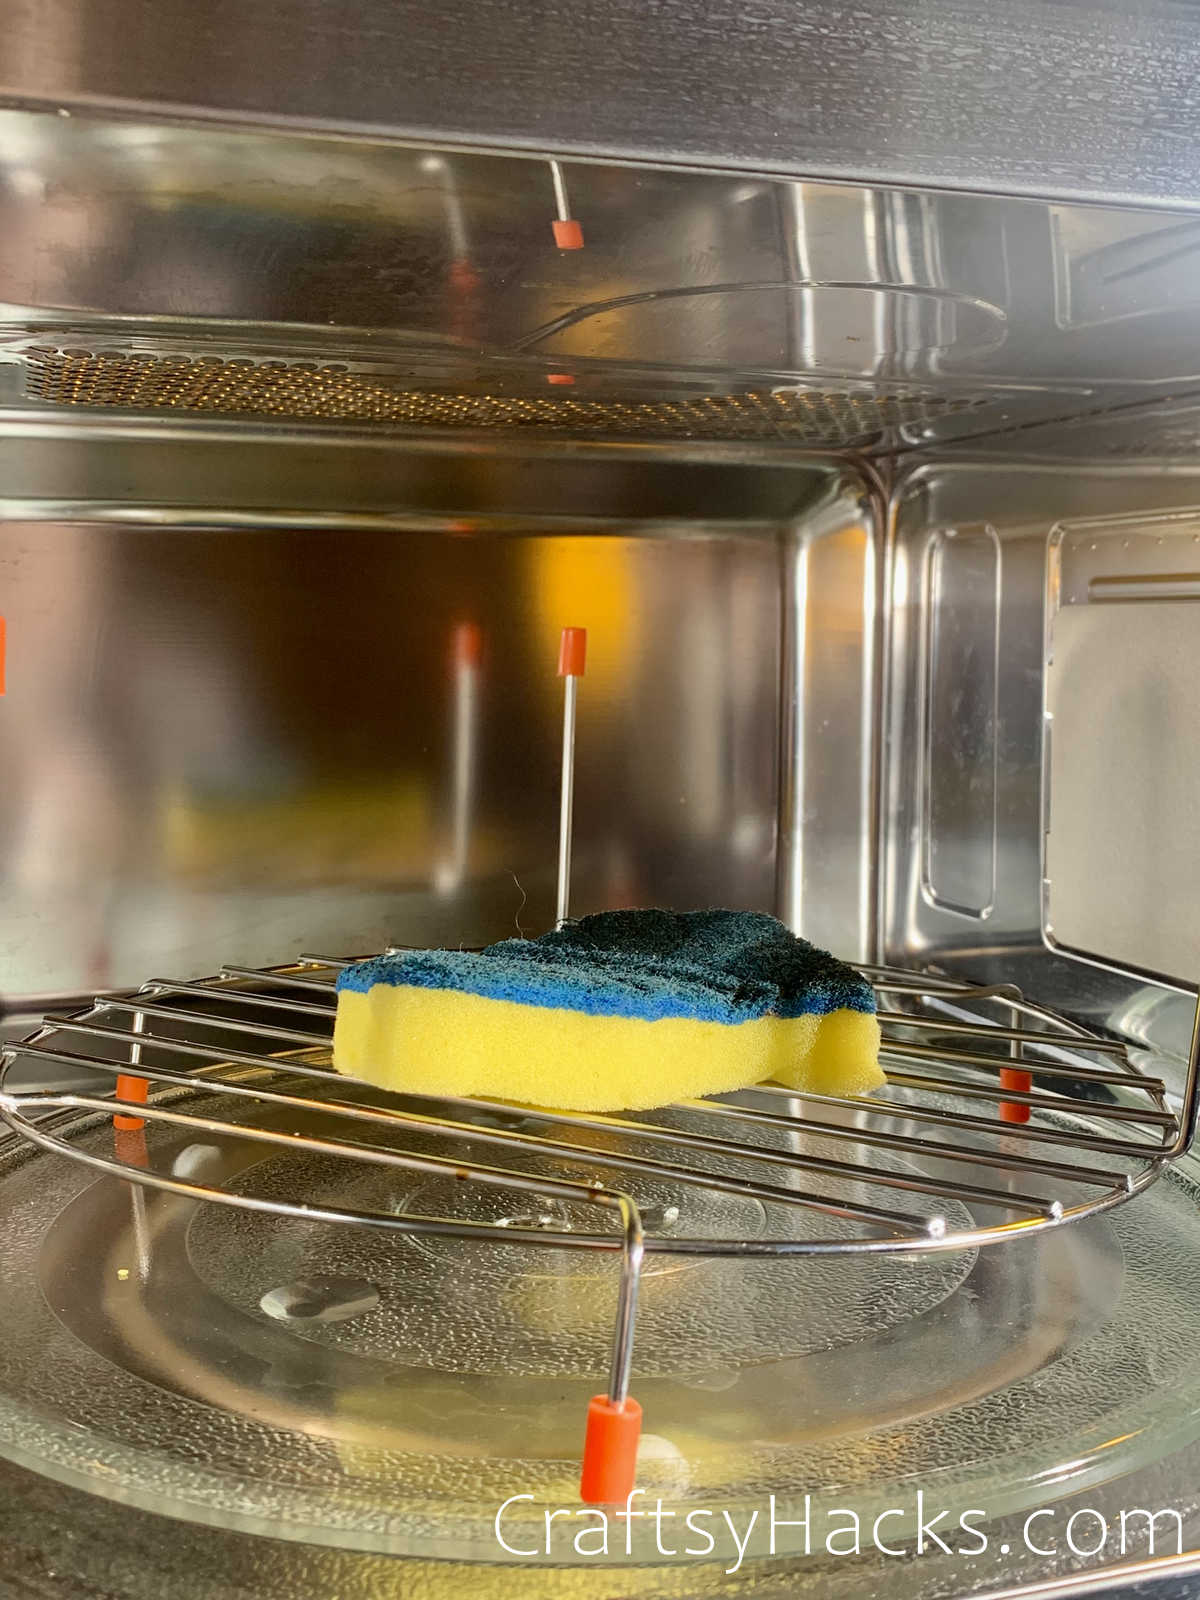 disinfect sponges in micowave